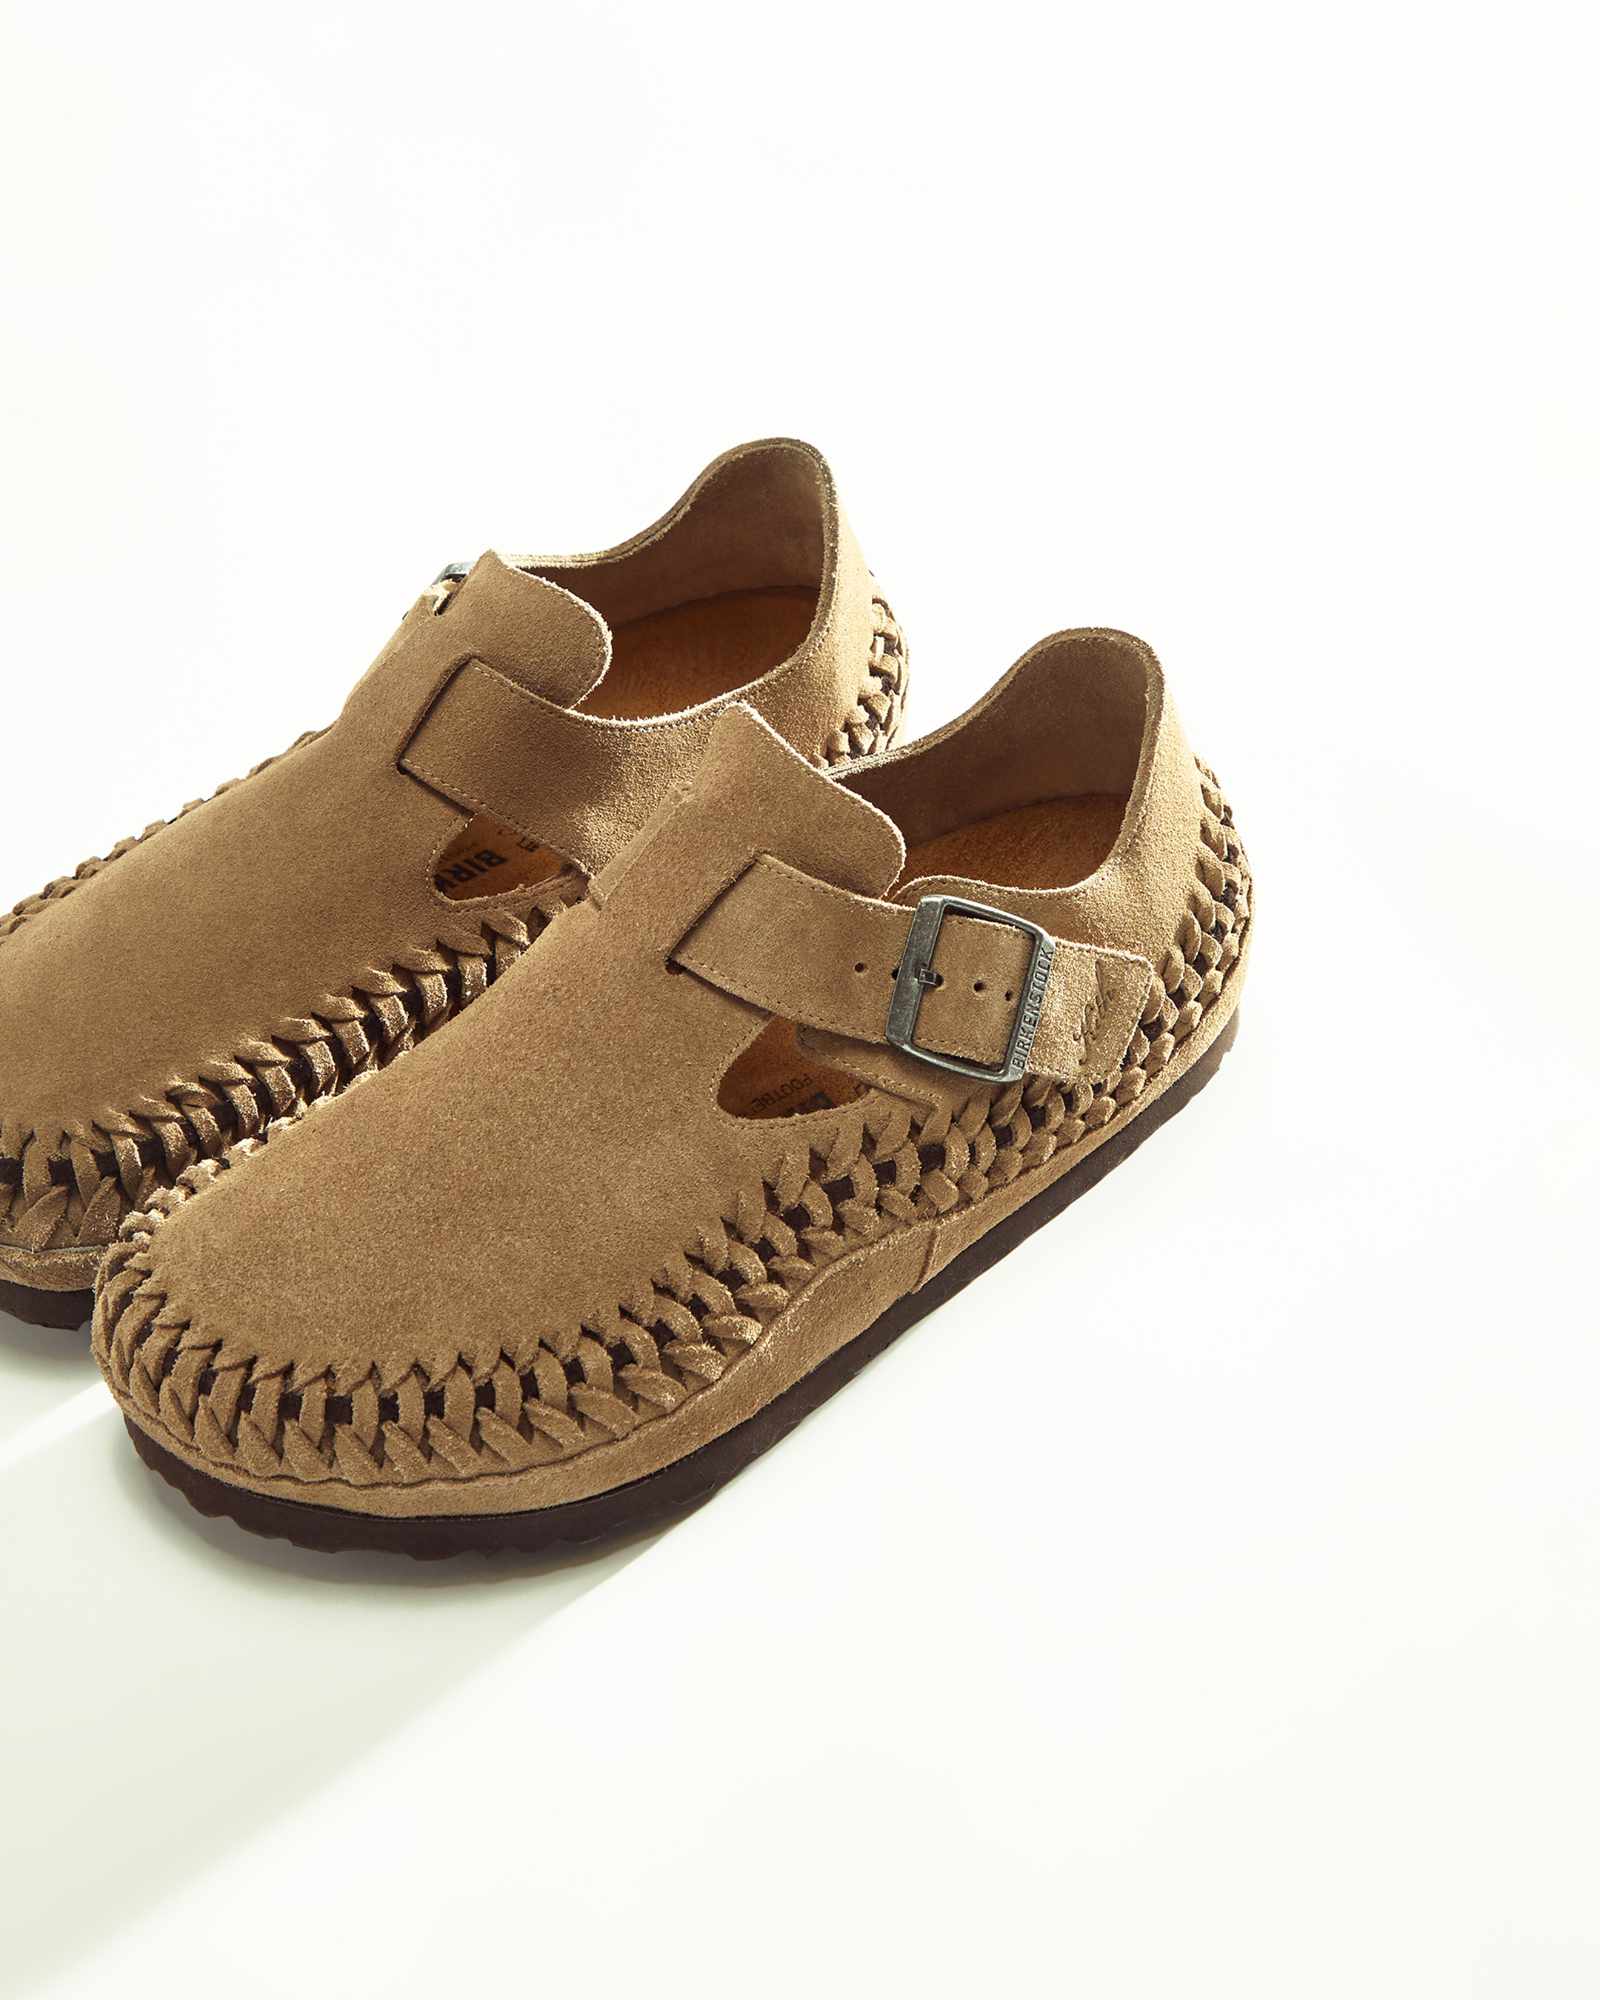 KITH & Birkenstock's collaborative braided London sandals in beige, brown, and black suede